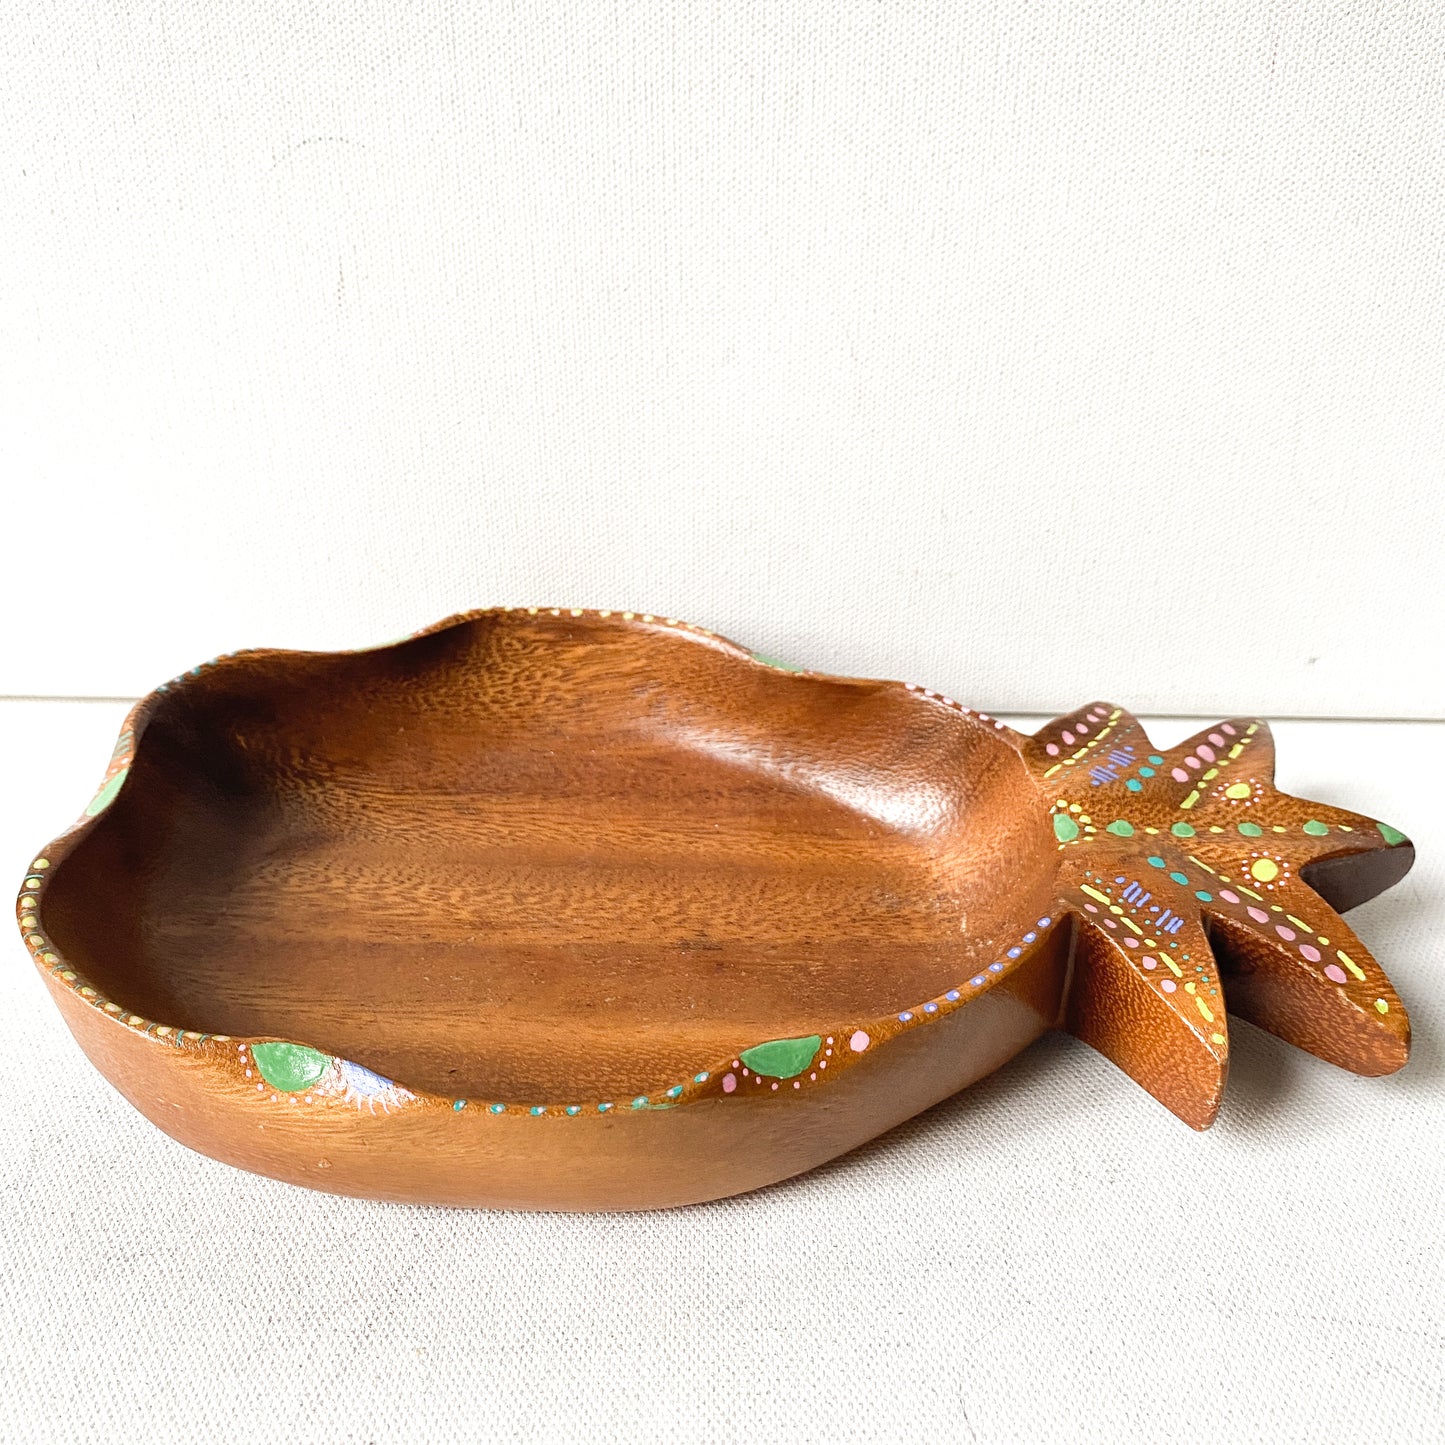 Vintage Wood Pineapple Bowl with Tropical, Bohemian Hand Painted details